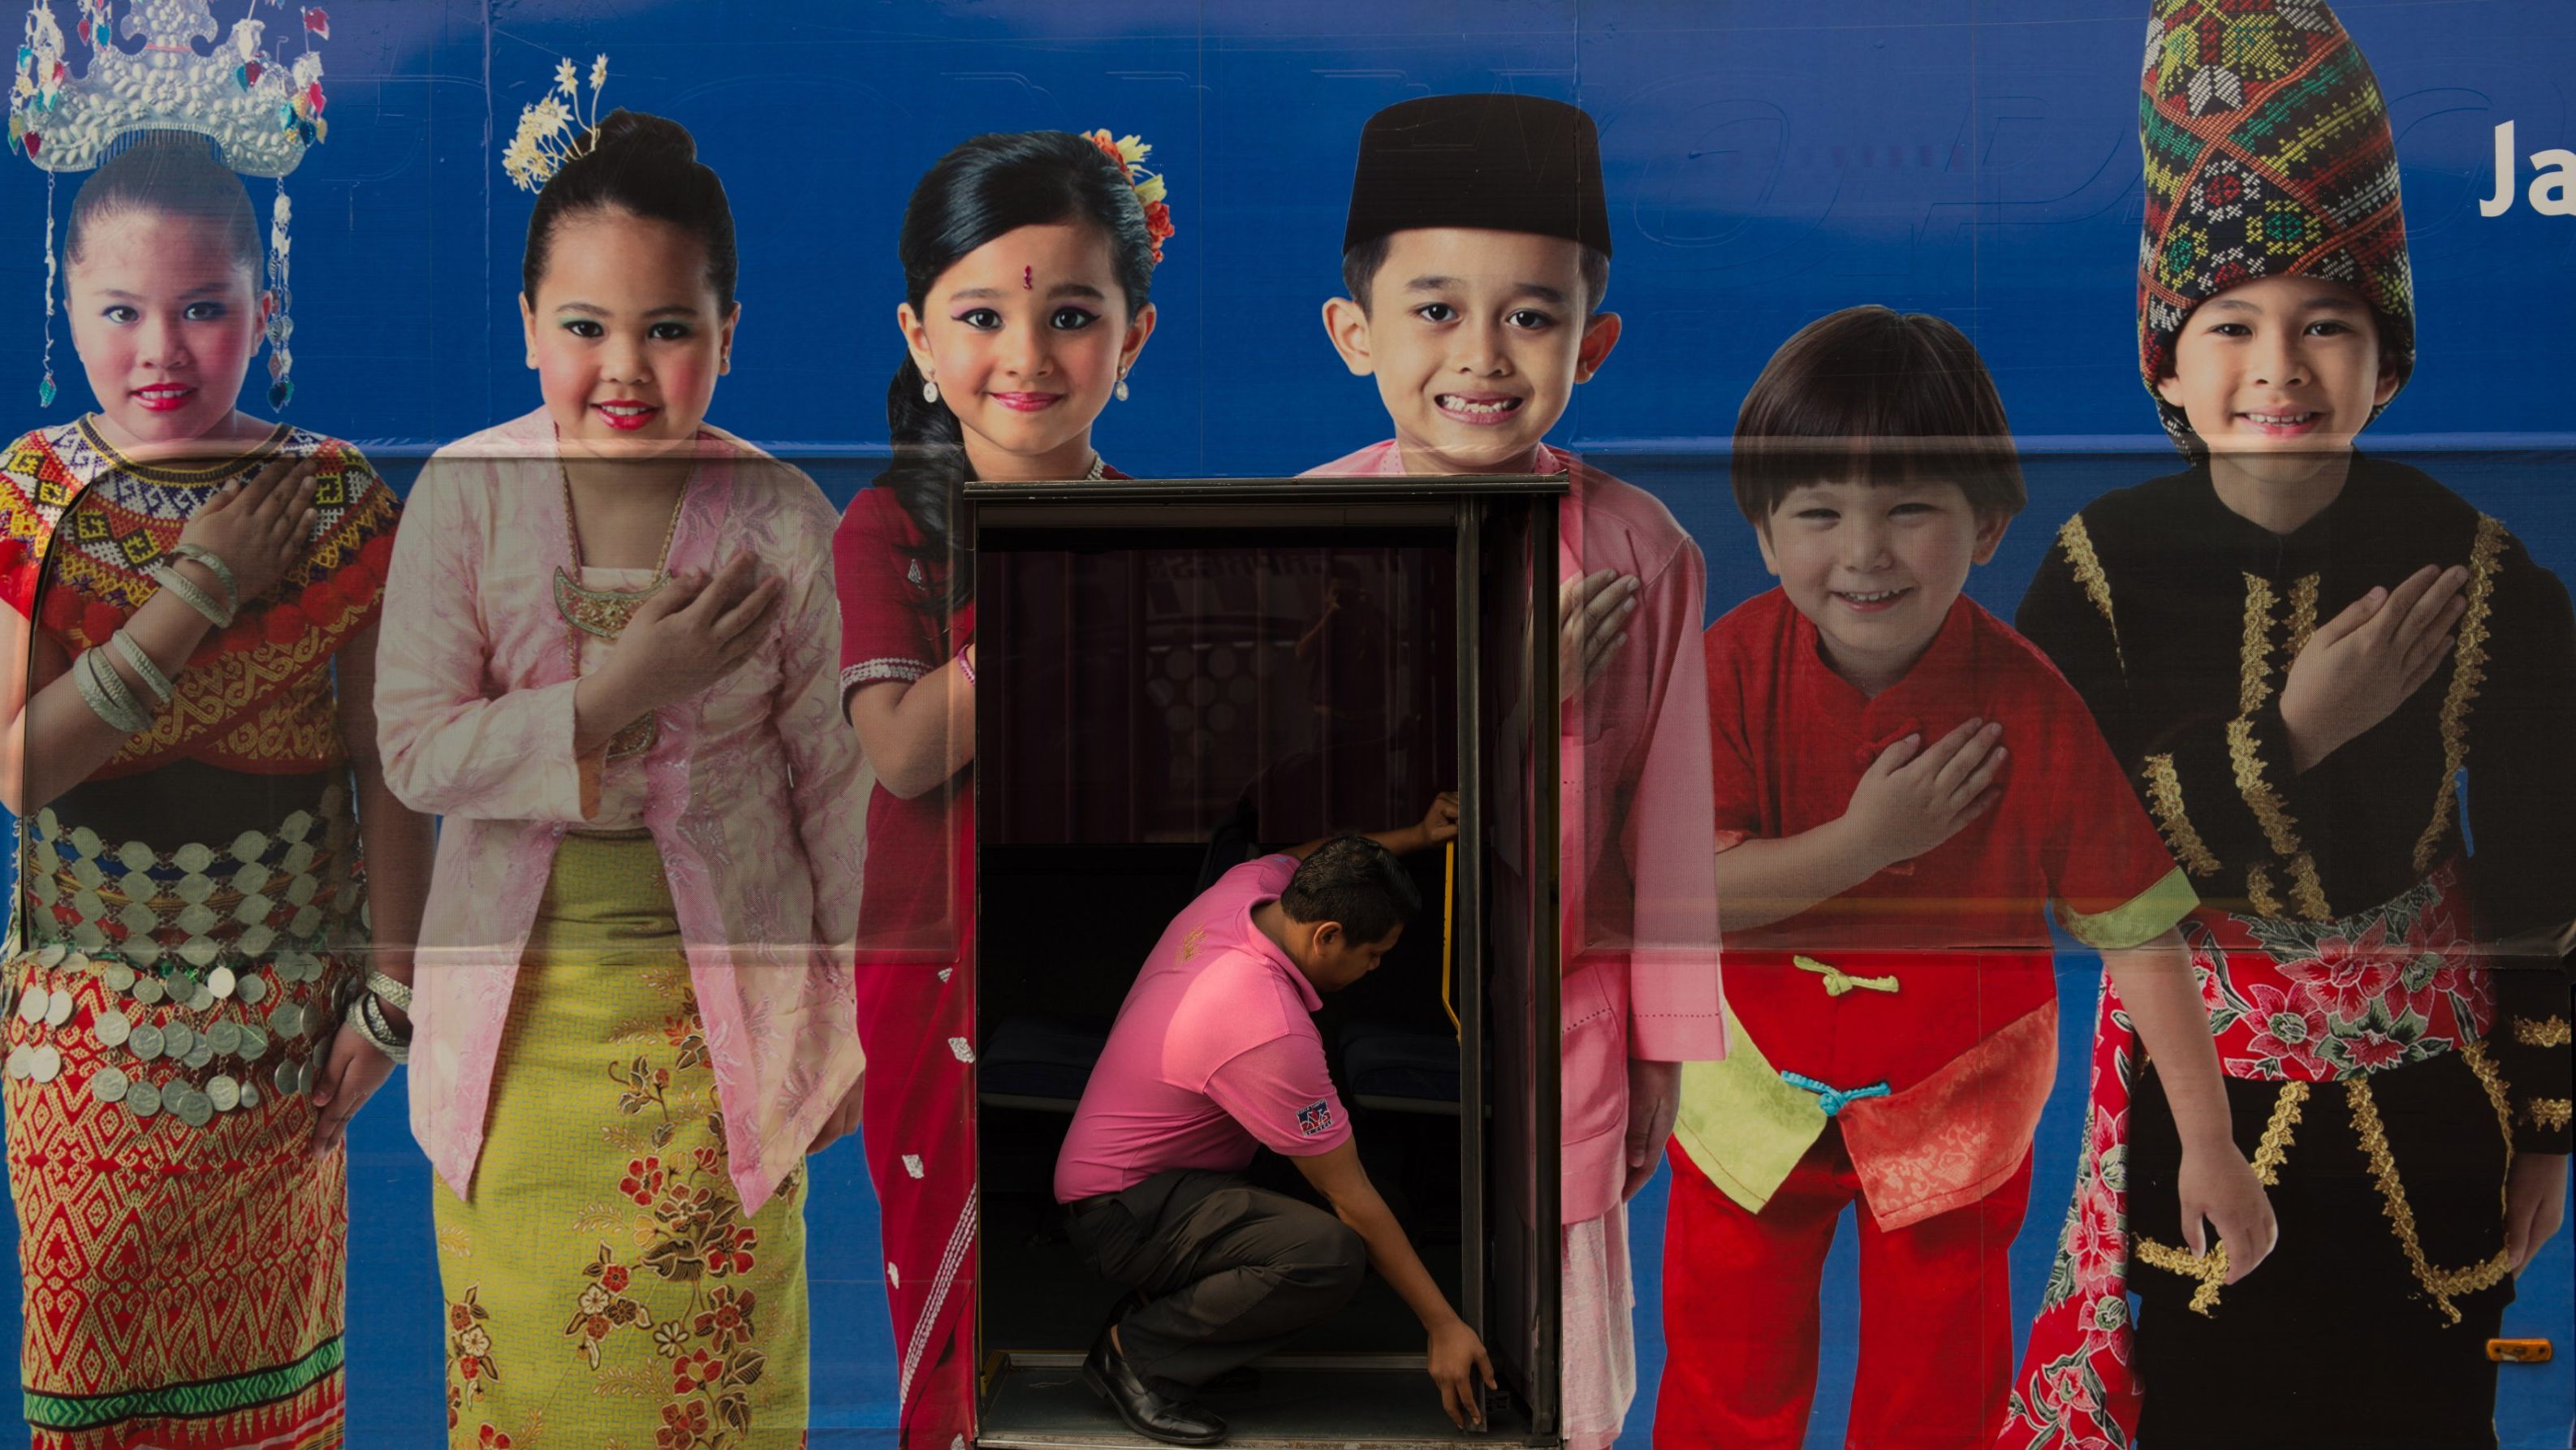 A man opens a bus door through an advertisement showing the Malaysia ethnic communities with traditional dress in Kuala Lumpur, September 25, 2013. 